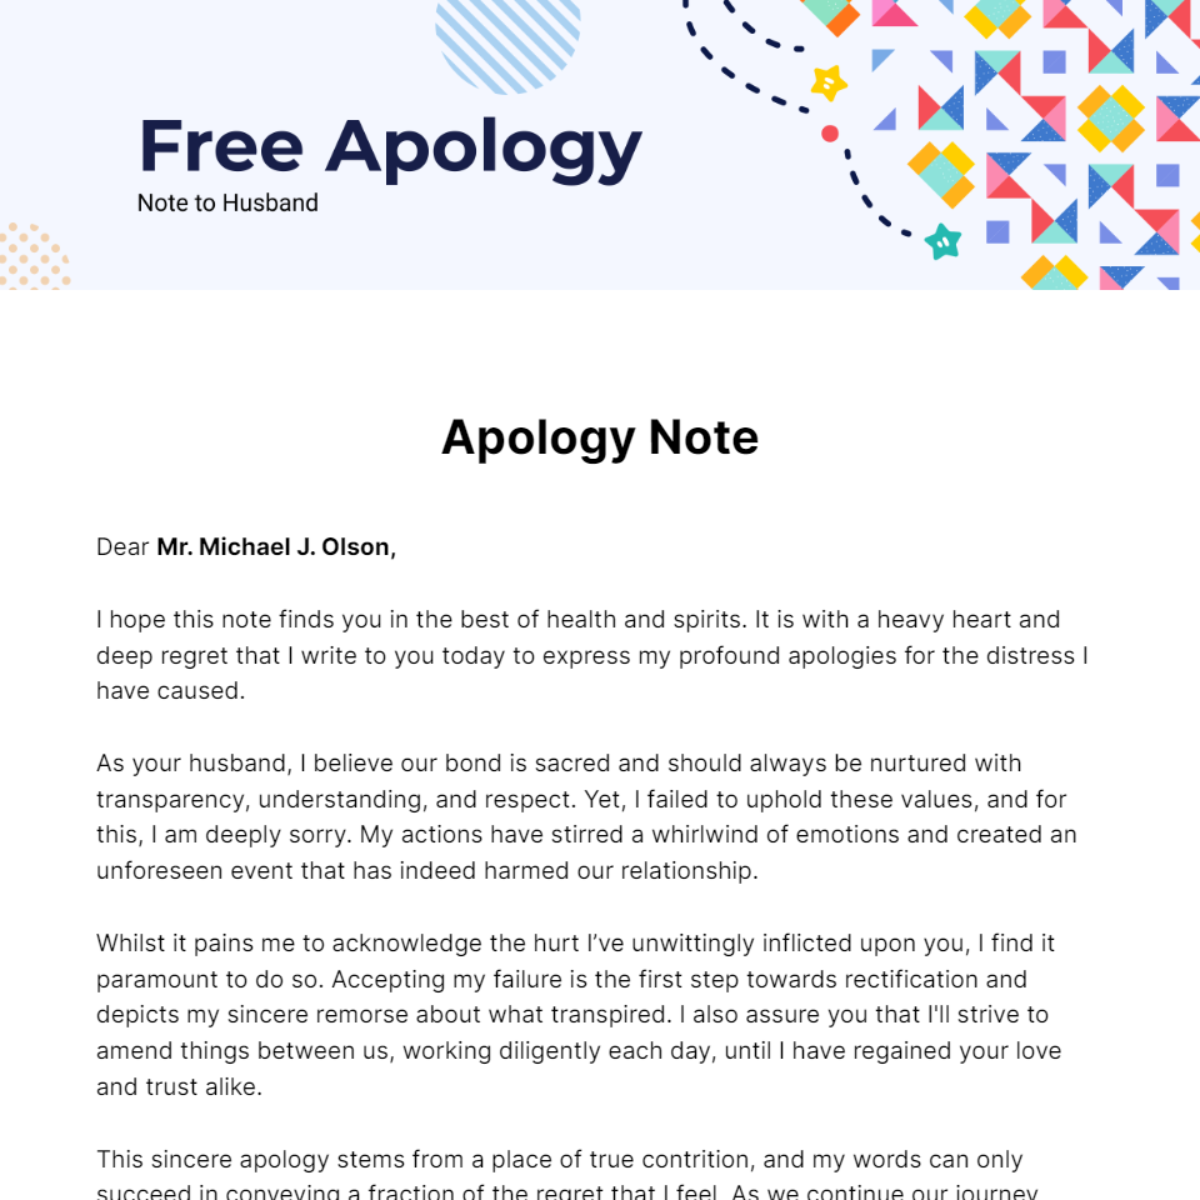 Free Apology Note to Husband Template